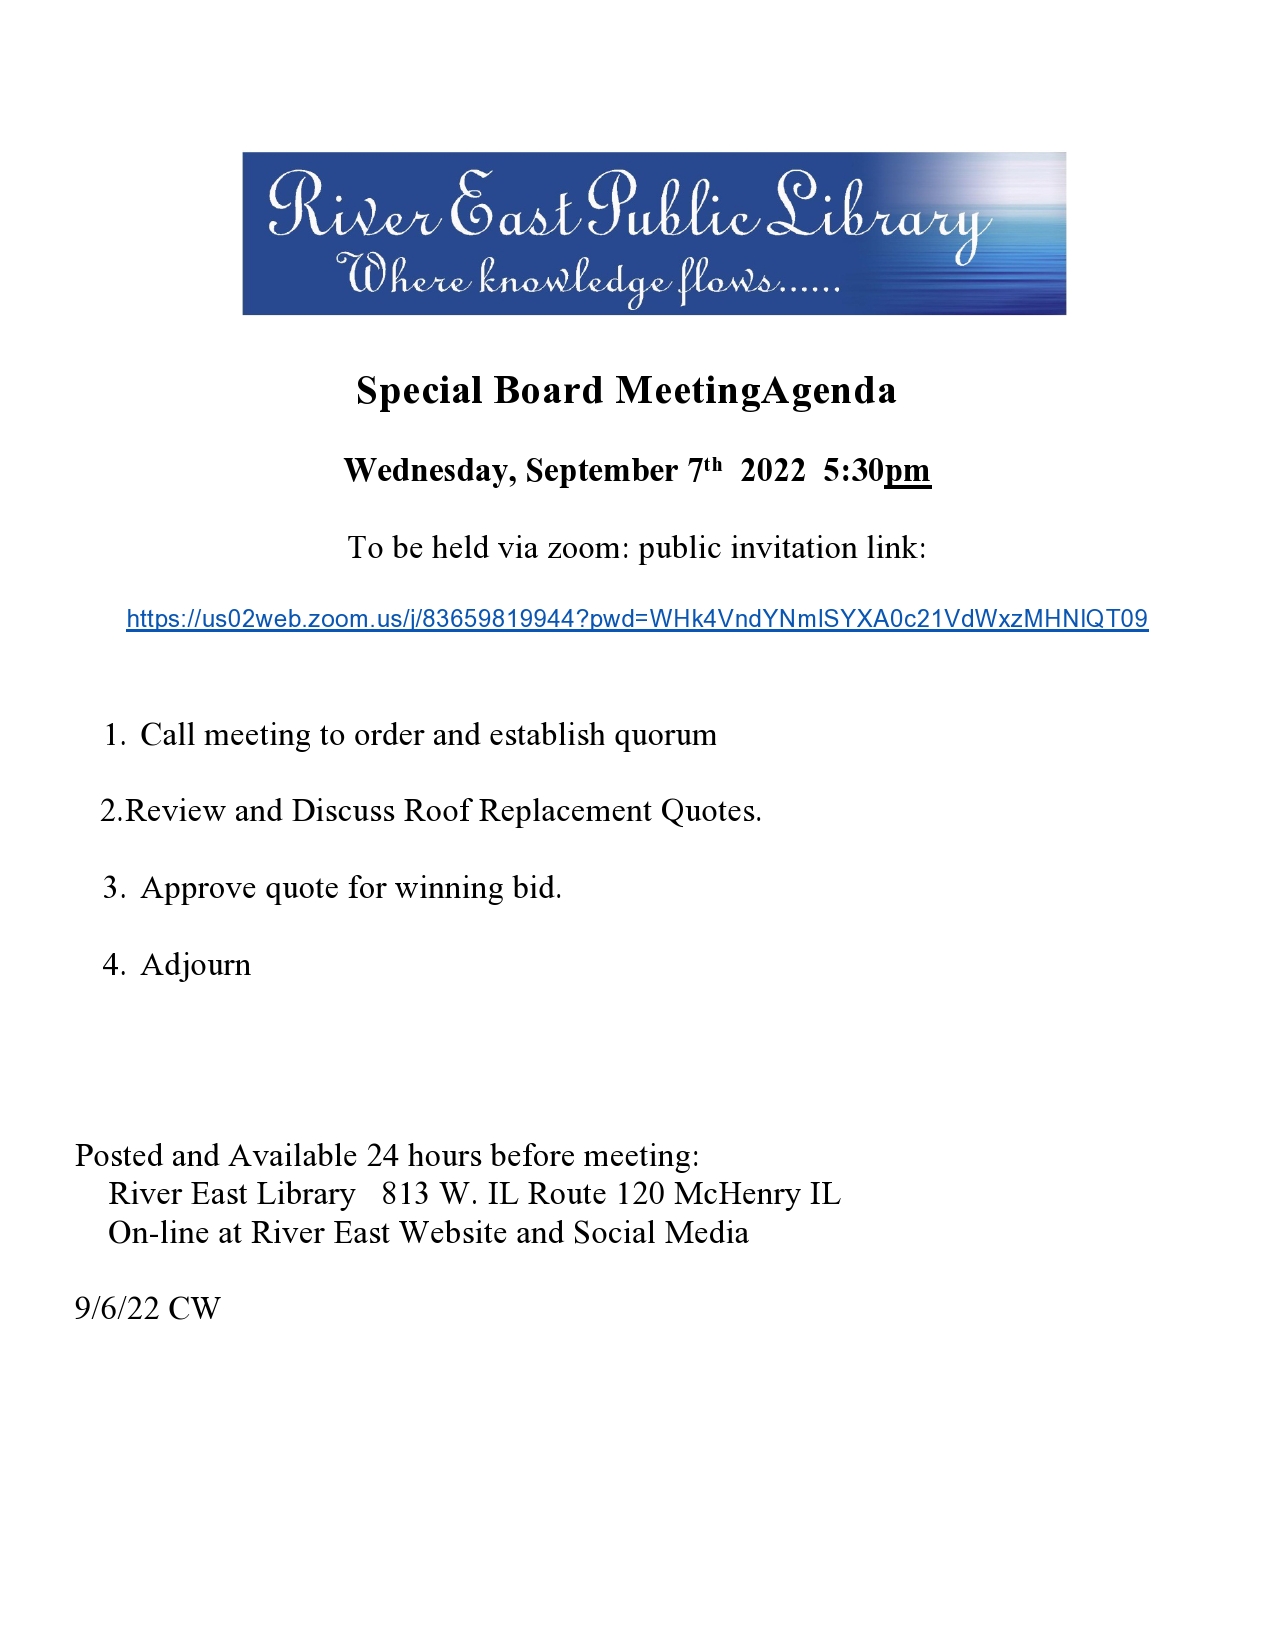 Poster with details of the special Board Meeting for a new roof, dated September 6 2022